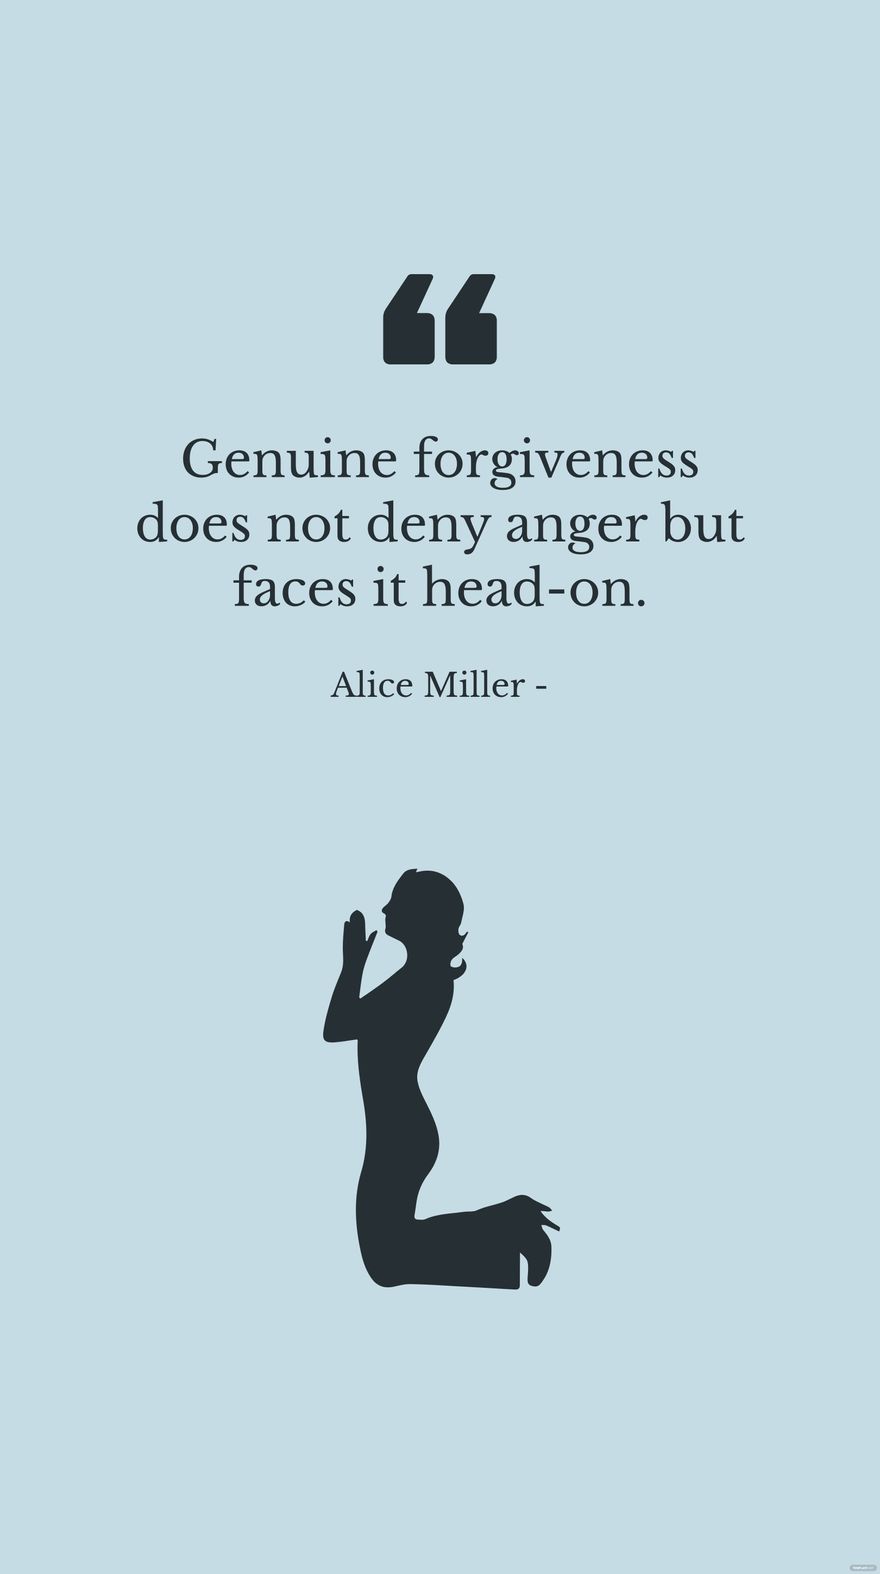 Free Alice Miller - Genuine forgiveness does not deny anger but faces it head-on.